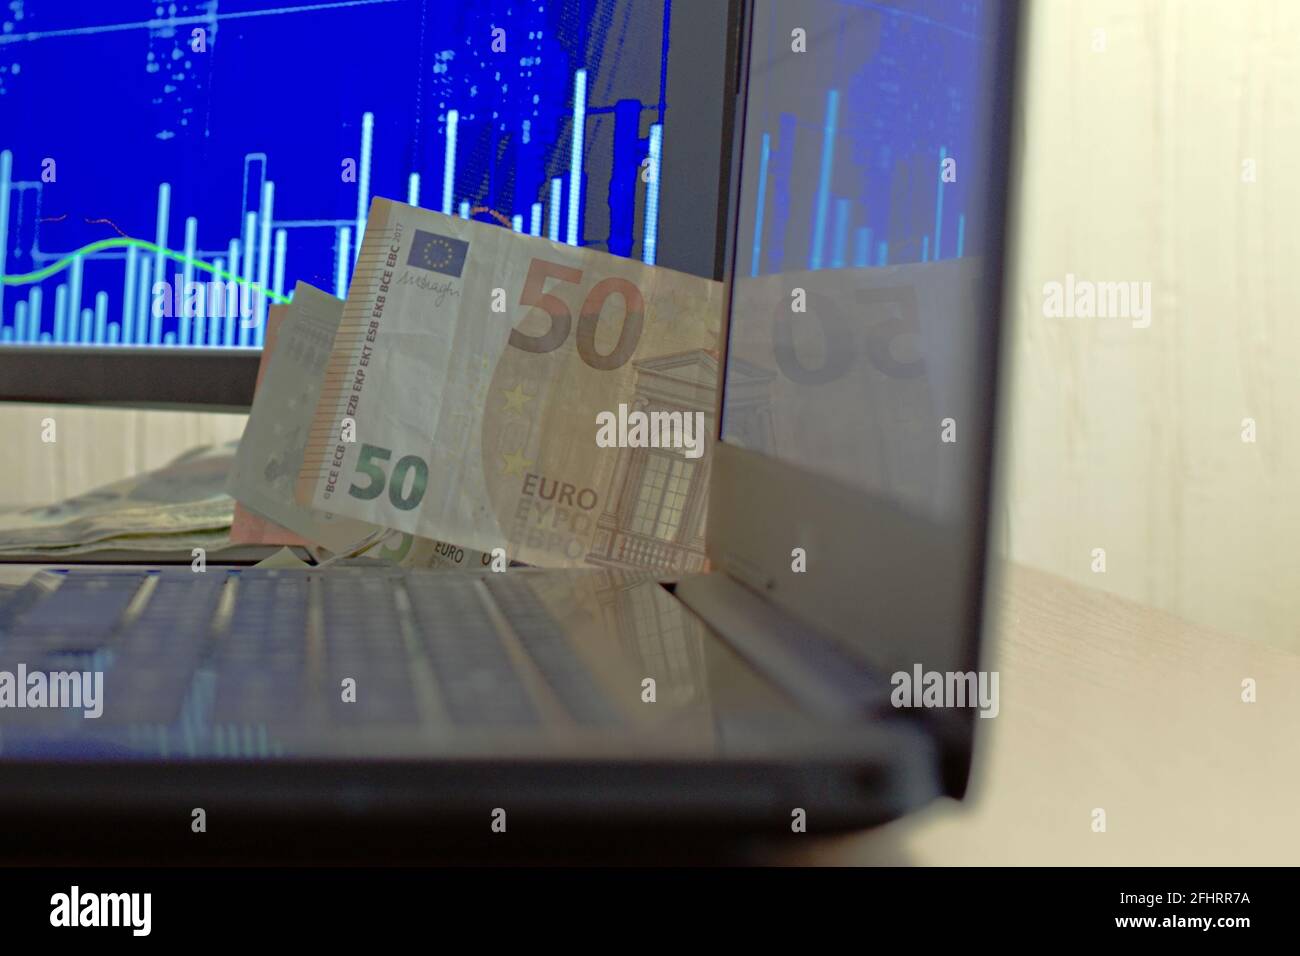 50 euro banknote close up on blurred background of computer screen and monitor with stock chart. Focus in center of image Stock Photo